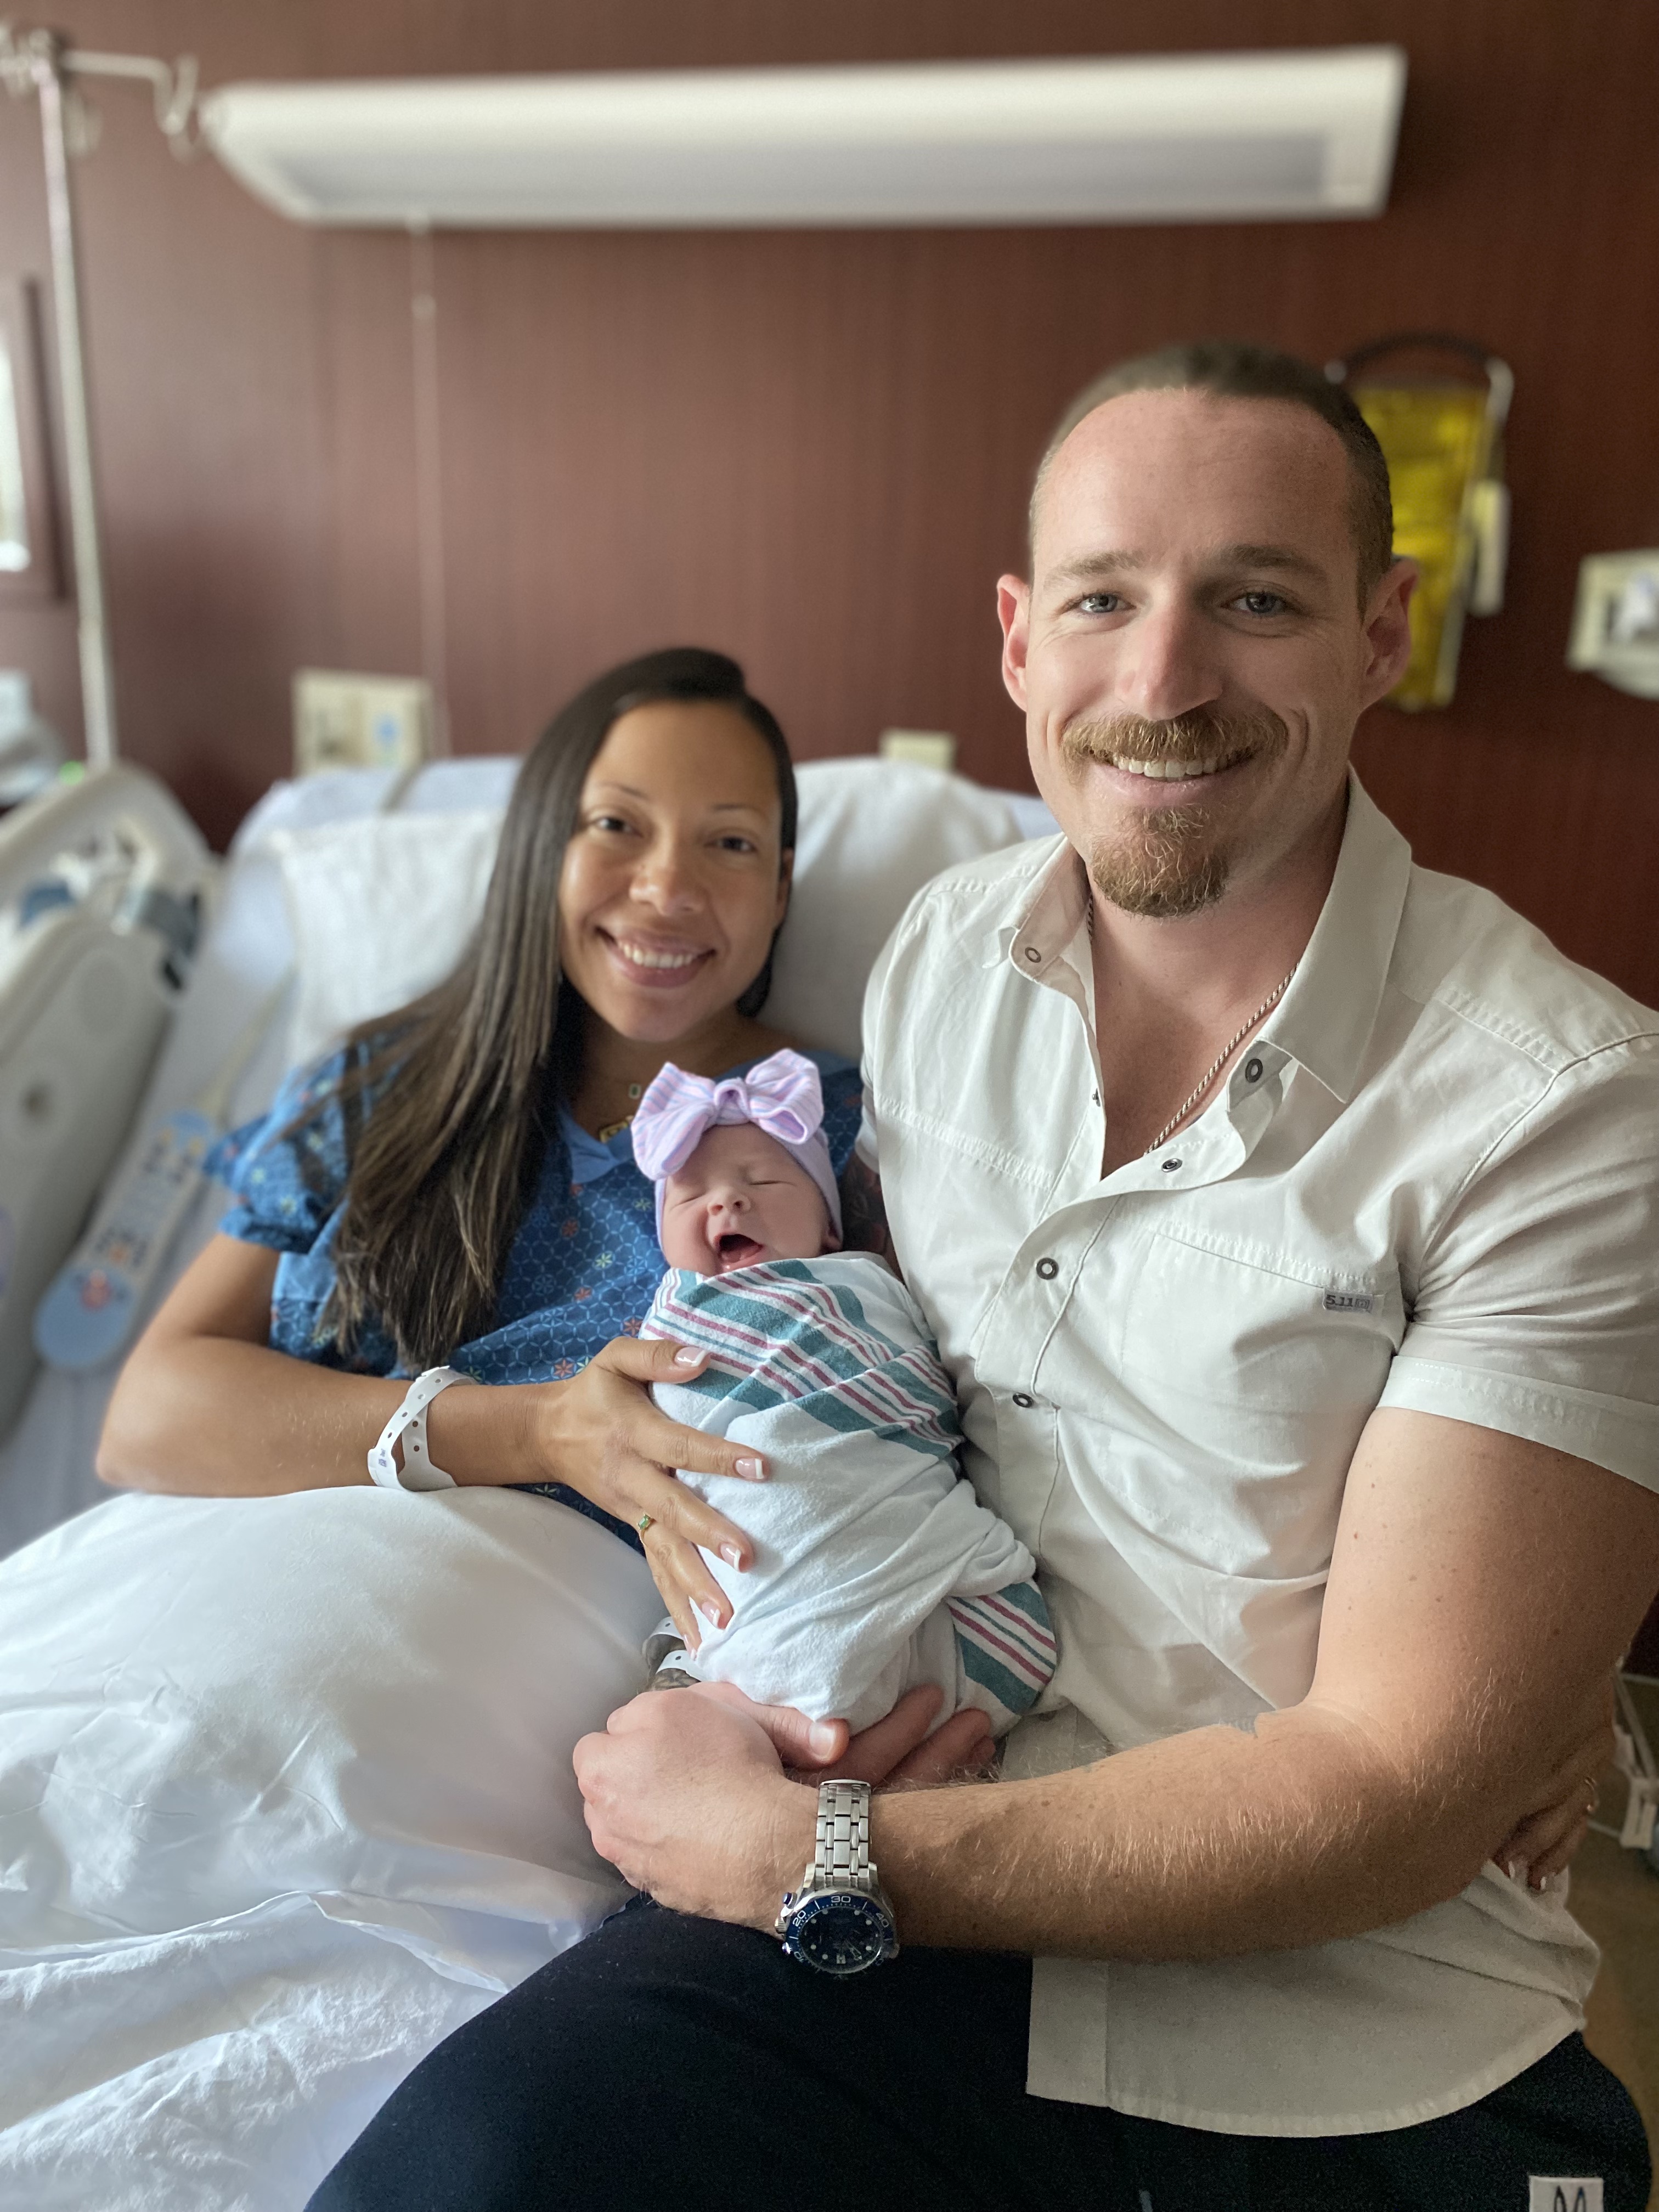 Drs. Ryan and Diane Day are all smiles with their newest arrival, Aviana Day, born on Father’s Day at HCA Florida North Florida Hospital.